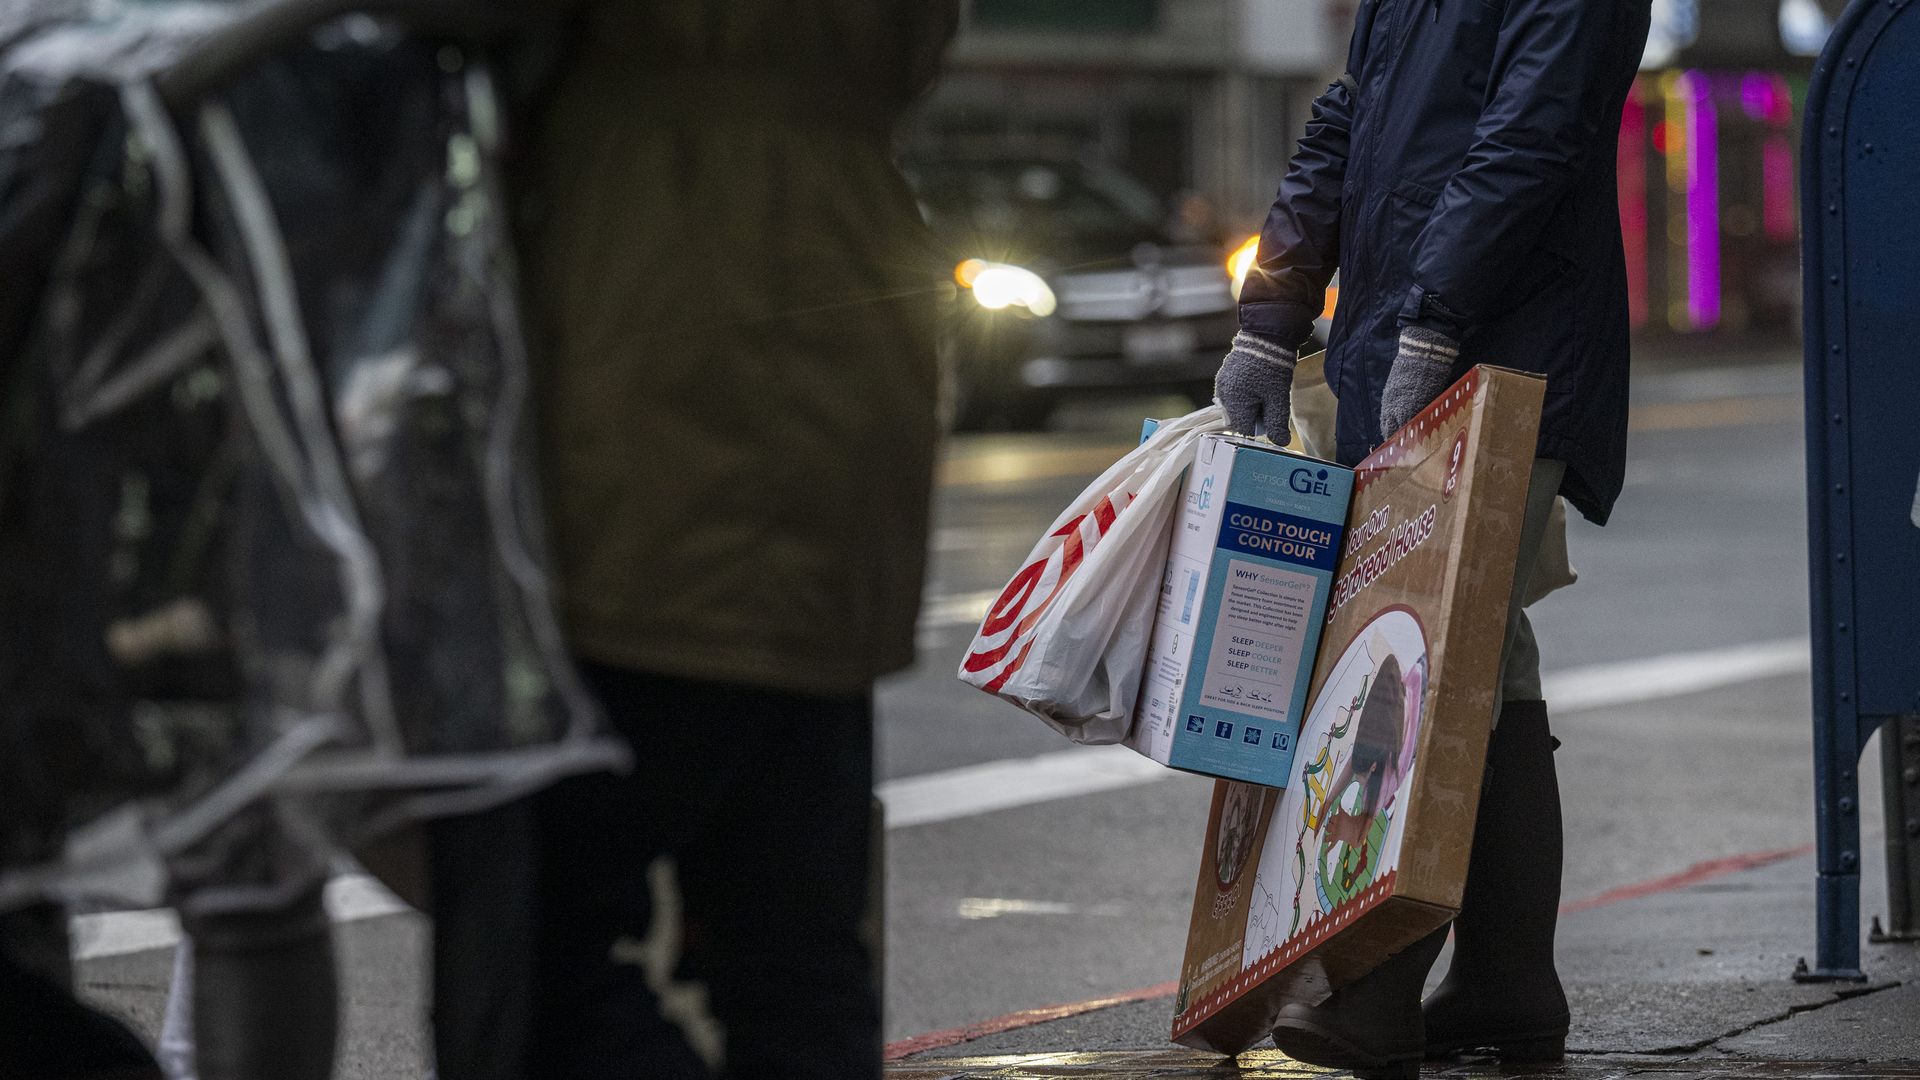 Shoppers hold bags in San Francisco, California, U.S., on Wednesday, Dec. 22, 2021